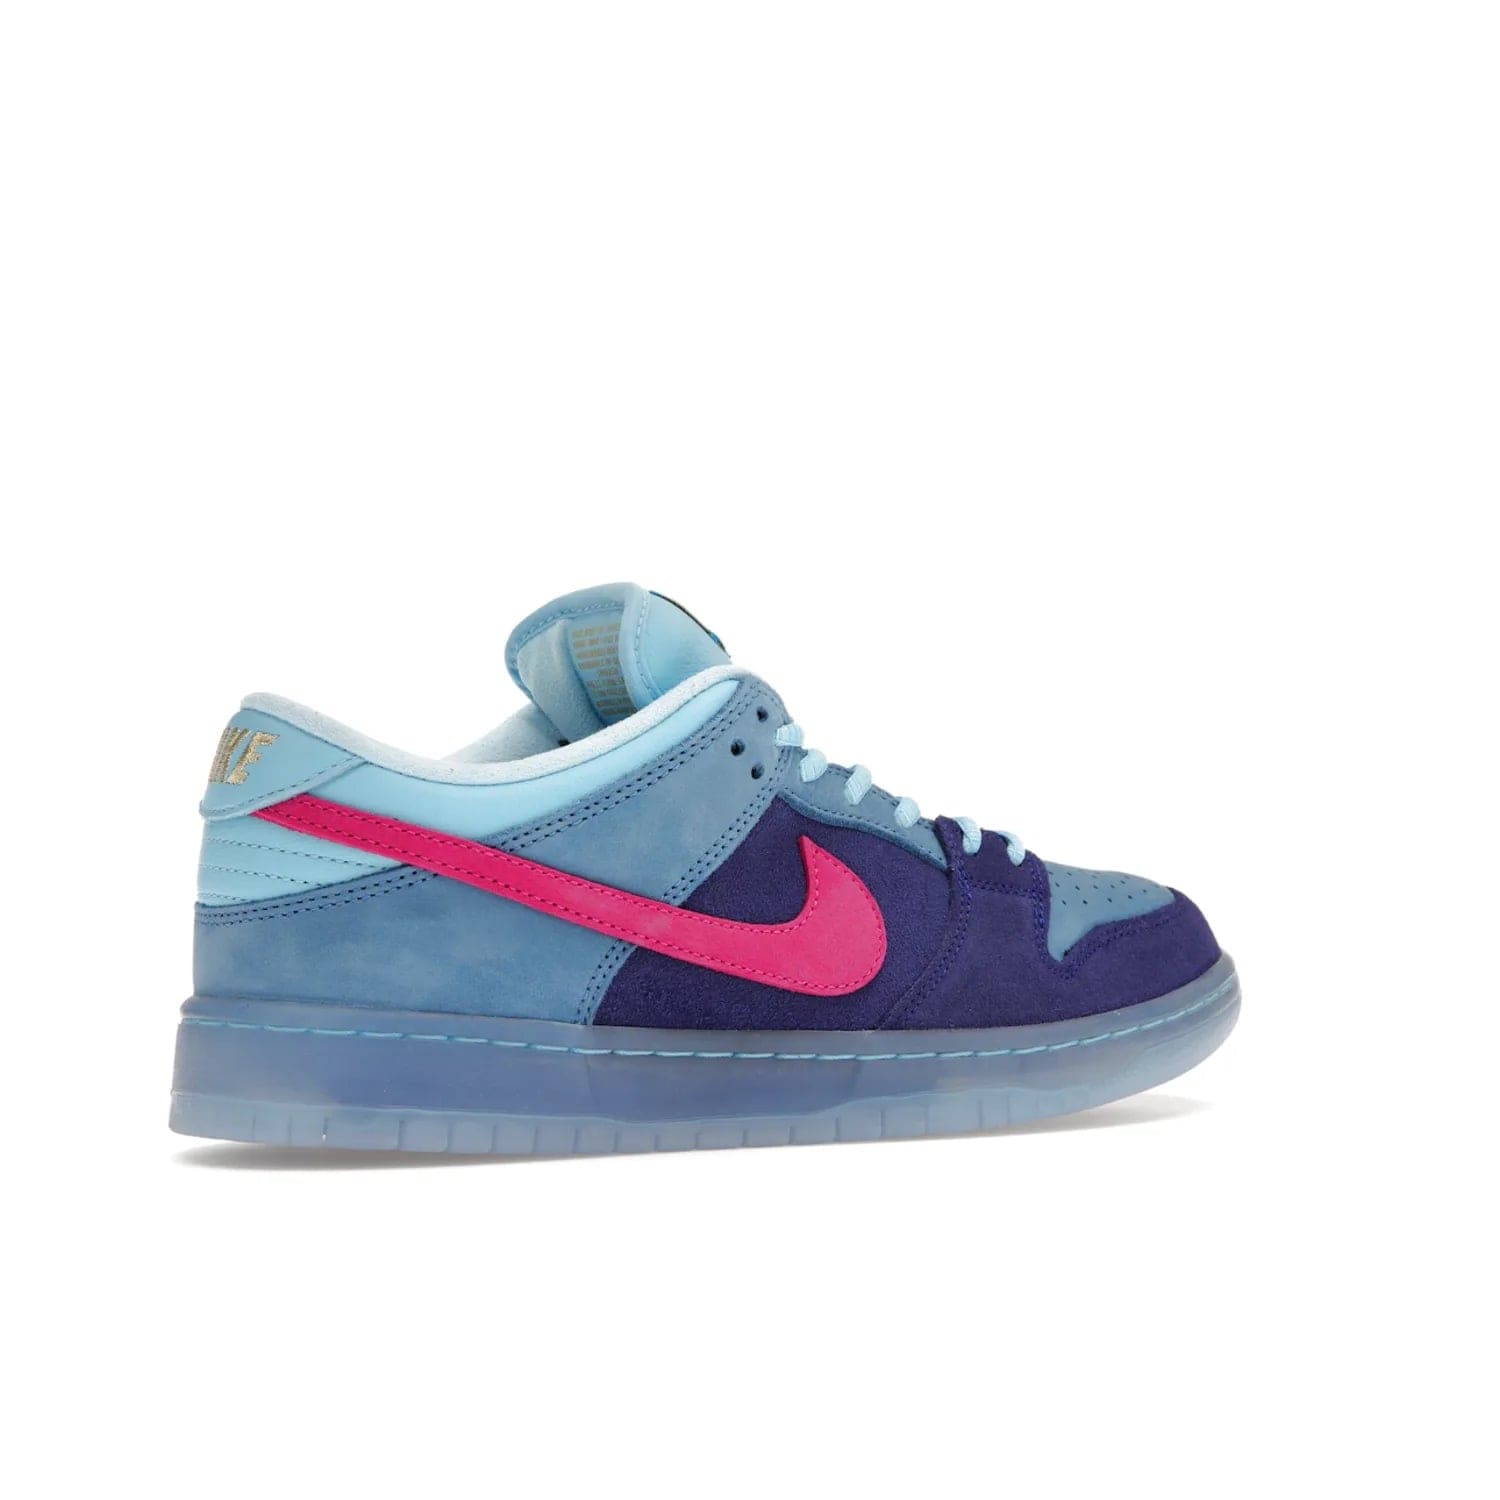 Nike SB Dunk Low Run The Jewels - Image 34 - Only at www.BallersClubKickz.com - The Nike SB Dunk Low Run The Jewels pays tribute to the Run the Jewels 3 album cover. It features a blue suede upper with pink suede accents, gold branding and 3 lace sets. RTJ insoles complete this limited edition sneaker. Get it now for your shoe collection.